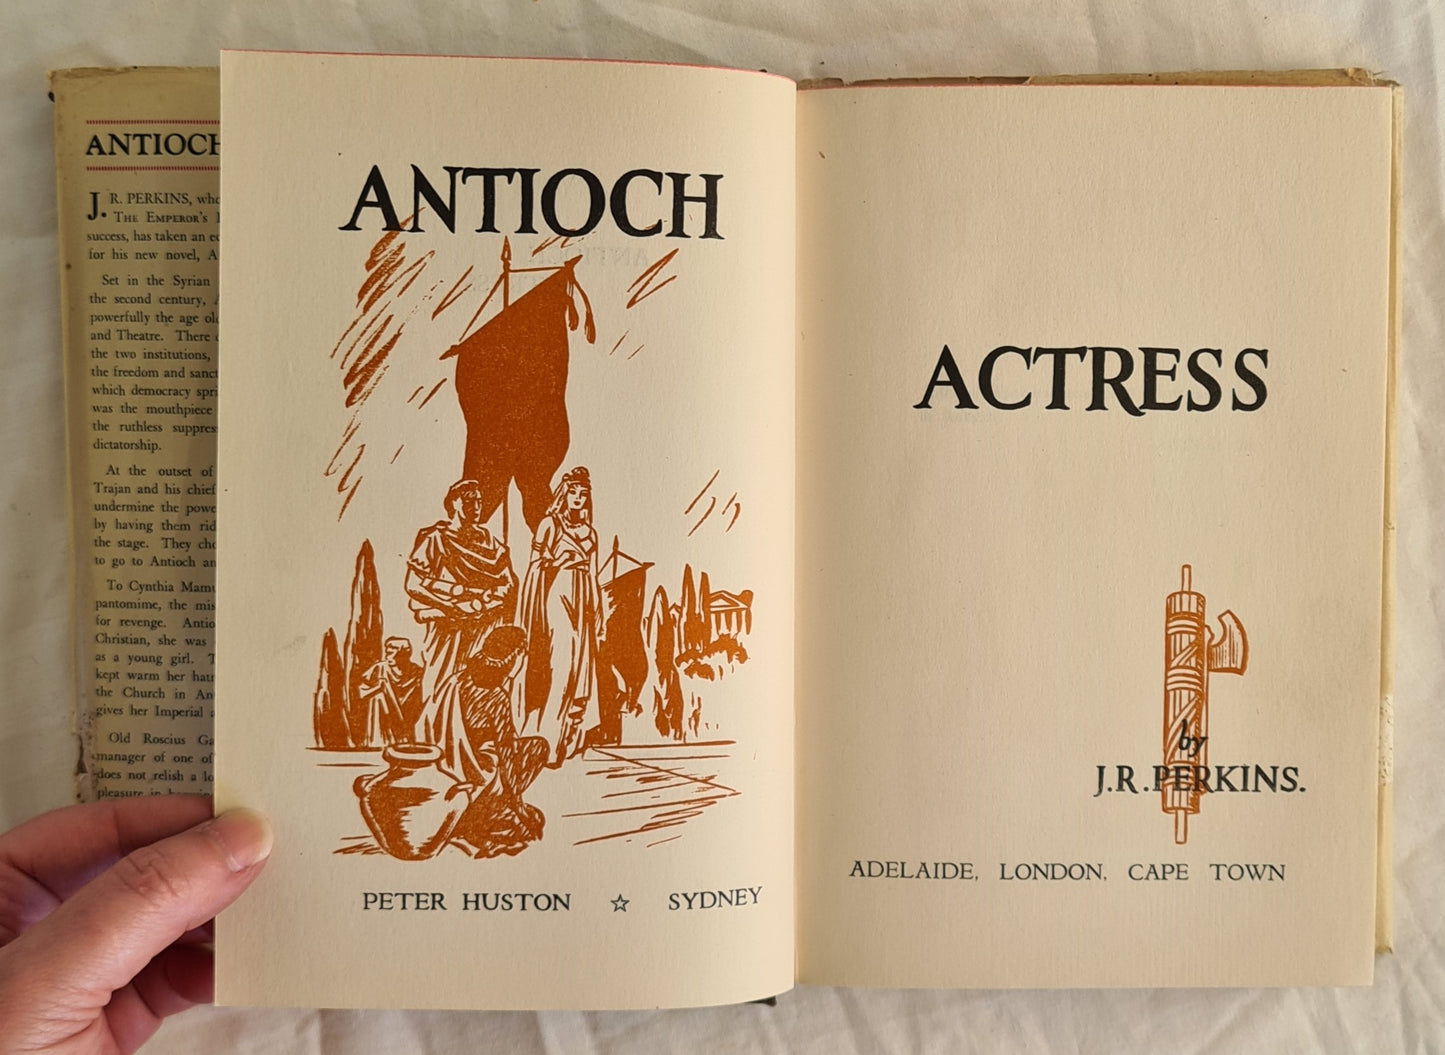 Antioch Actress by J. R. Perkins